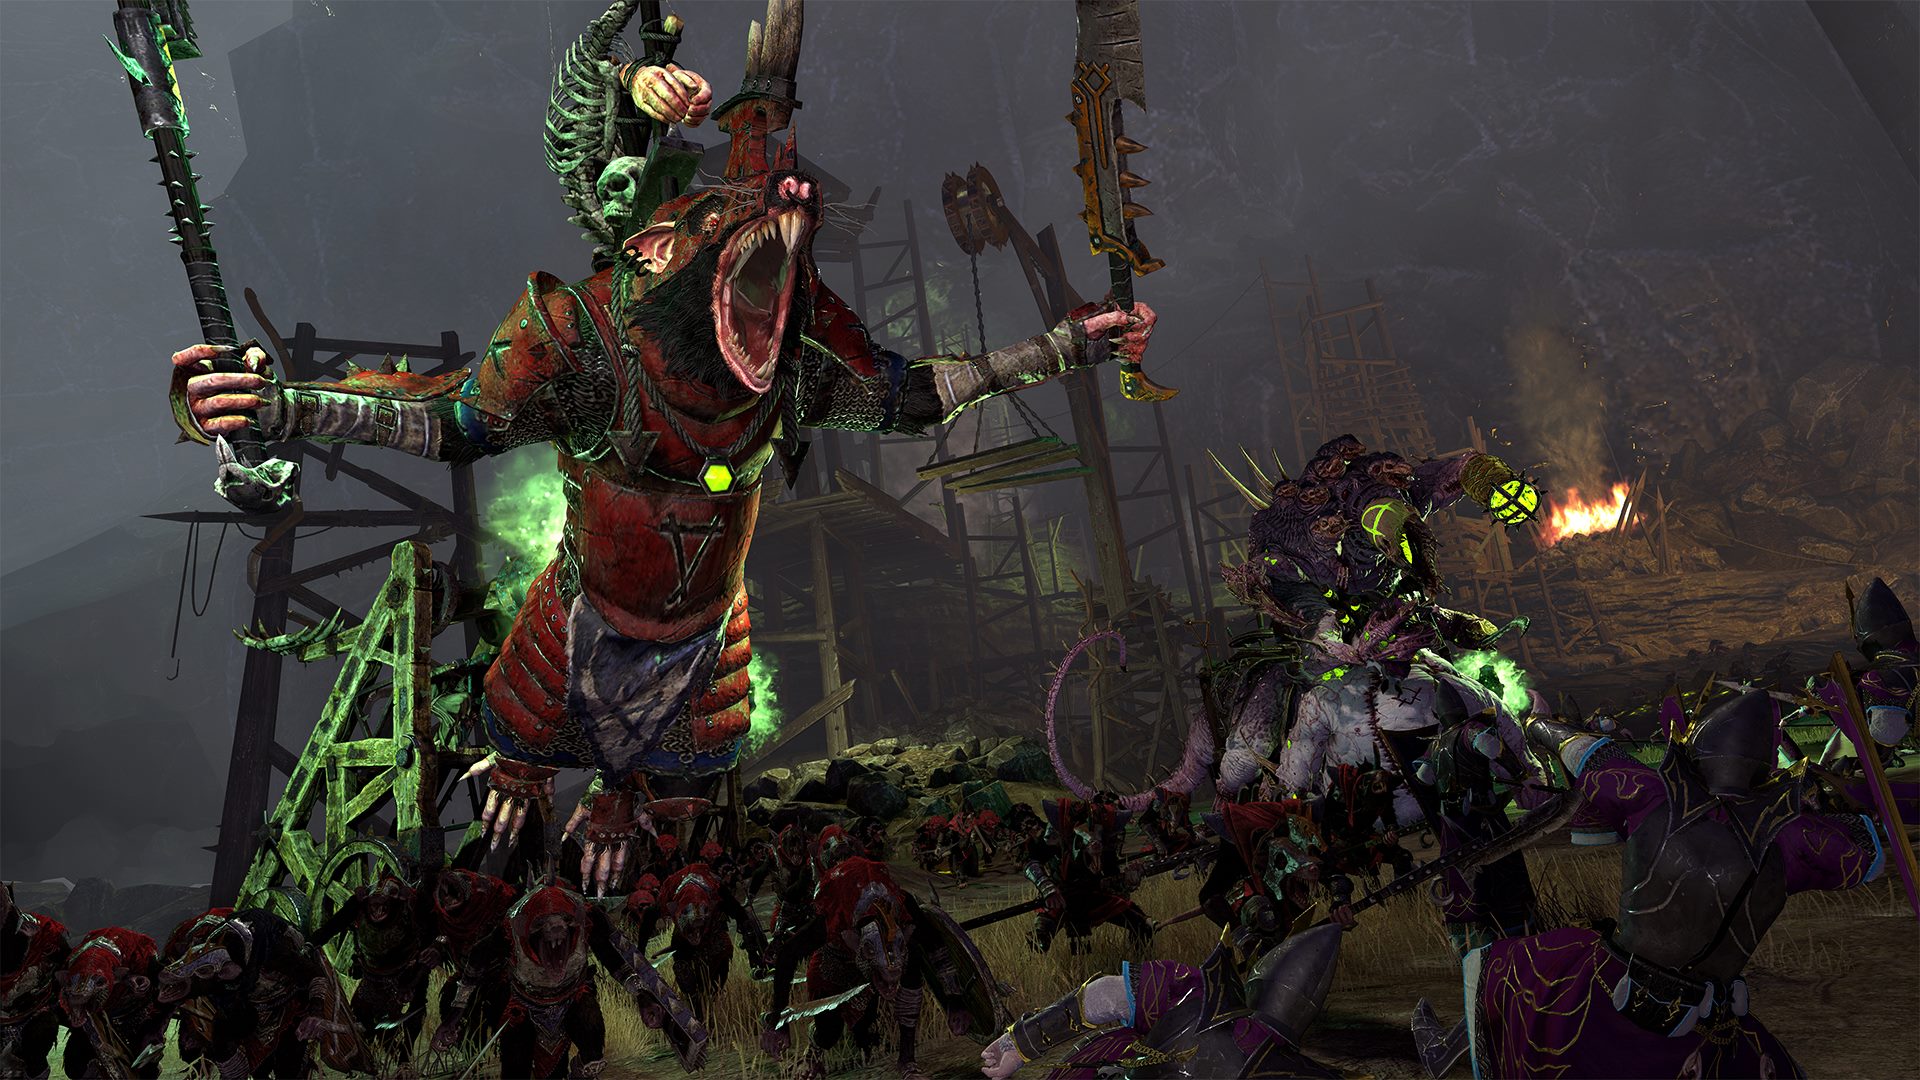 Some Nice Skaven Pictures From Wallpaper Material